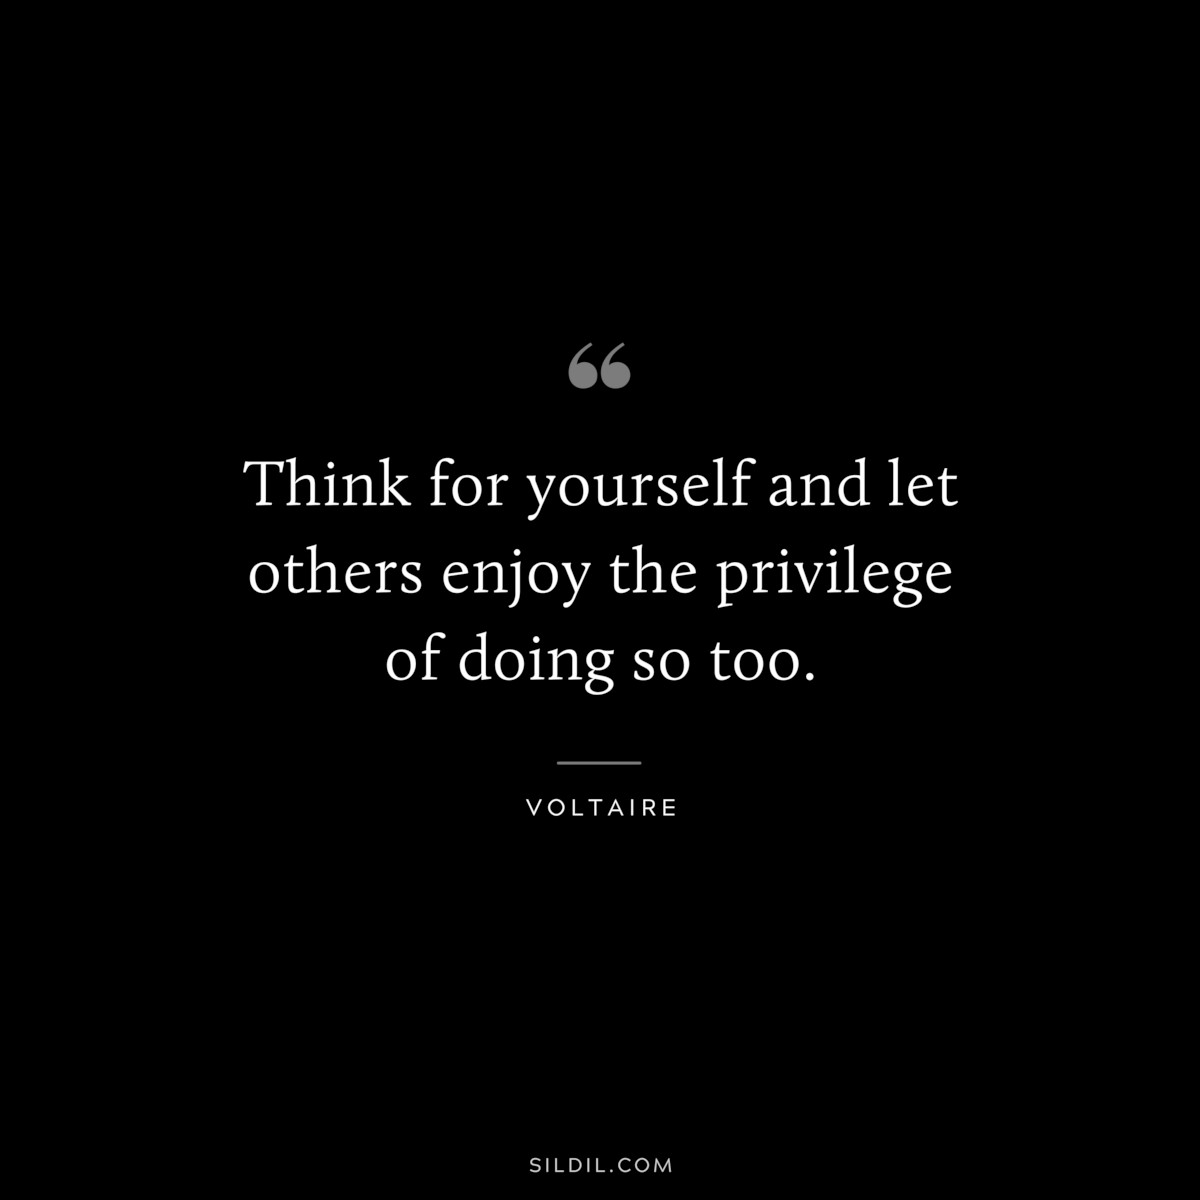 Think for yourself and let others enjoy the privilege of doing so too. ― Voltaire